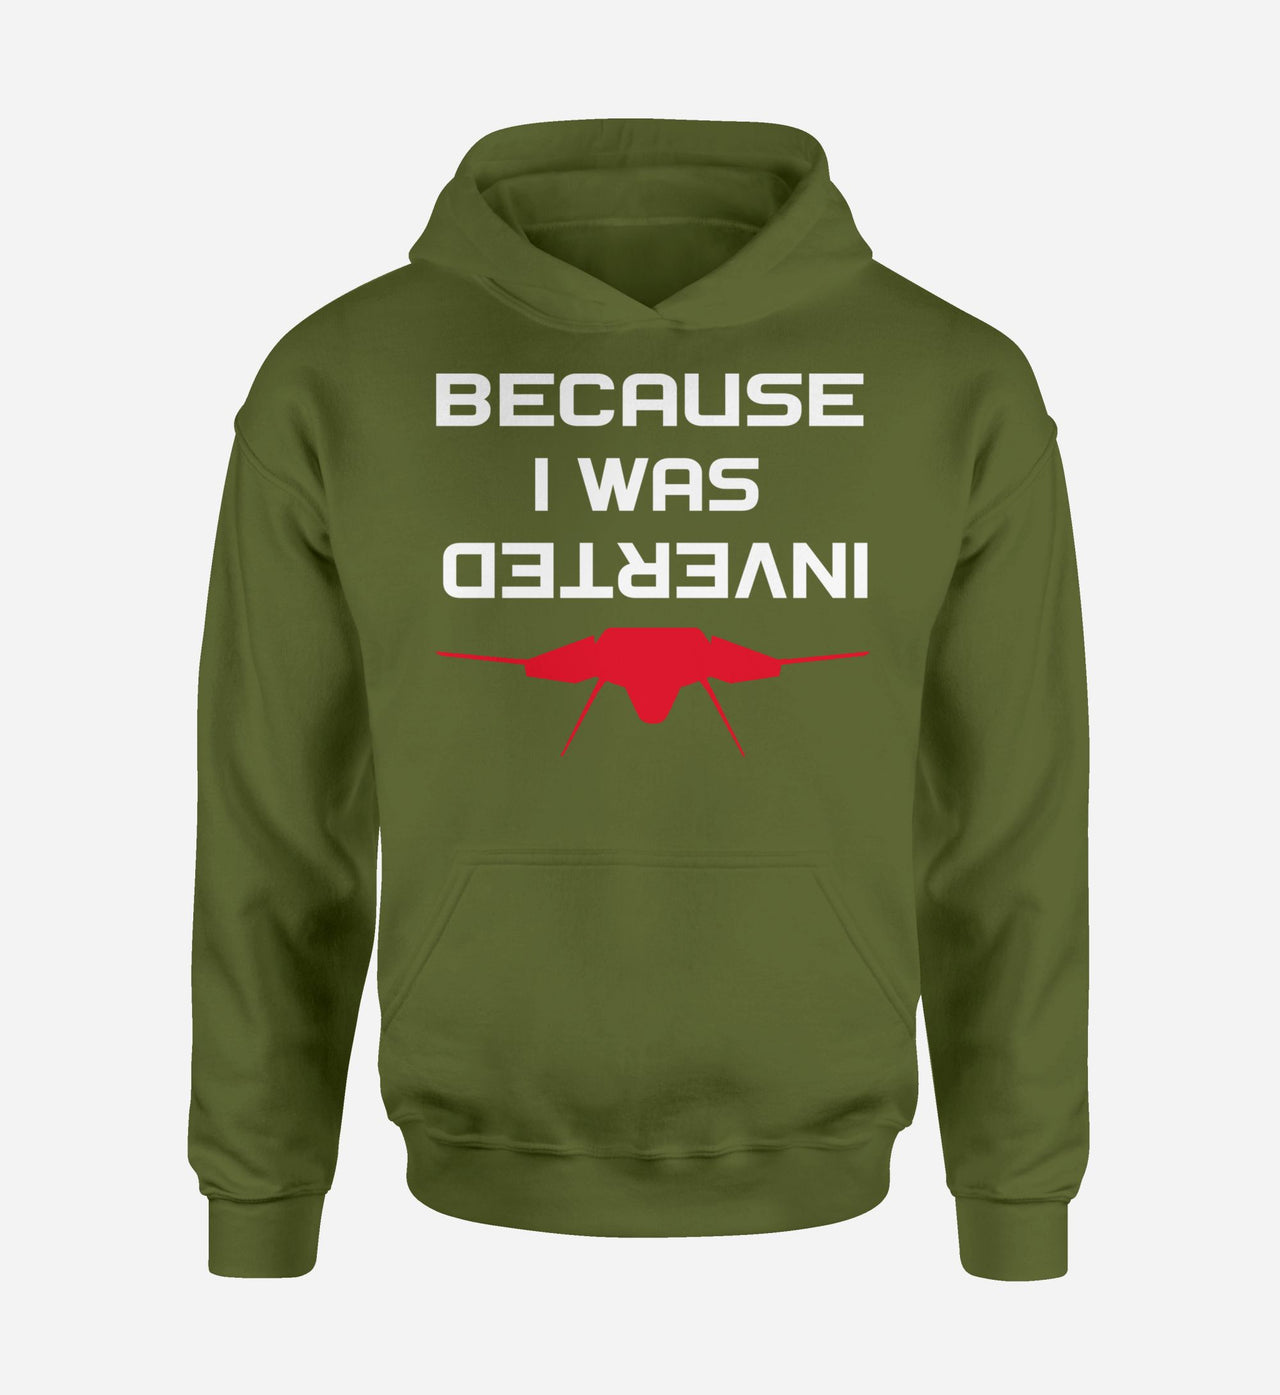 Because I was Inverted Designed Hoodies